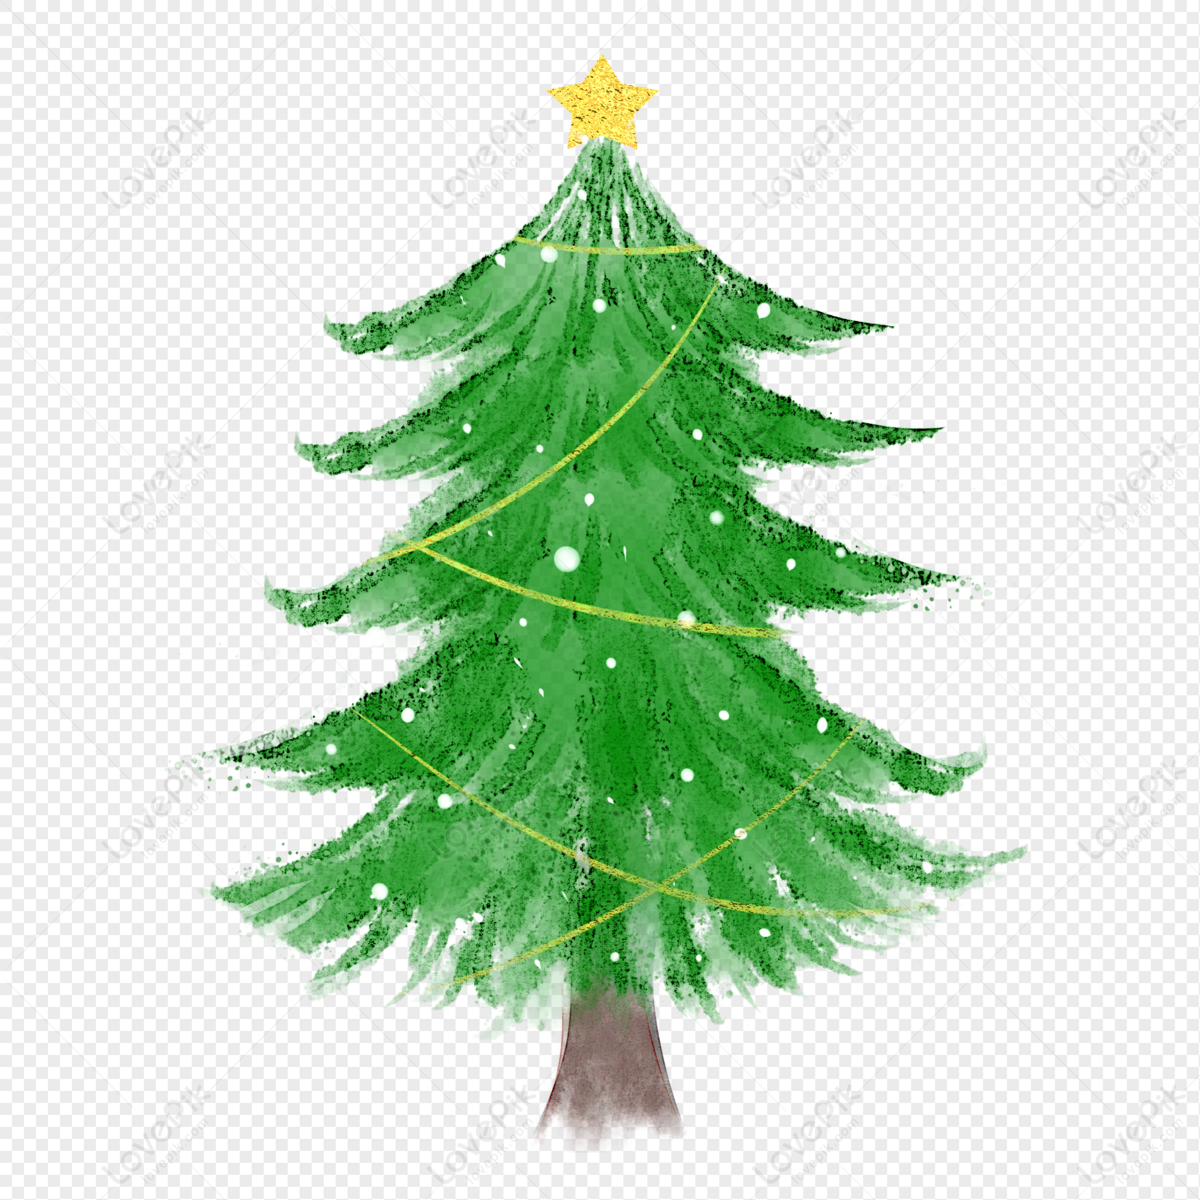 Watercolor Style Christmas Tree Png Image And Clipart Image For Free Download Lovepik